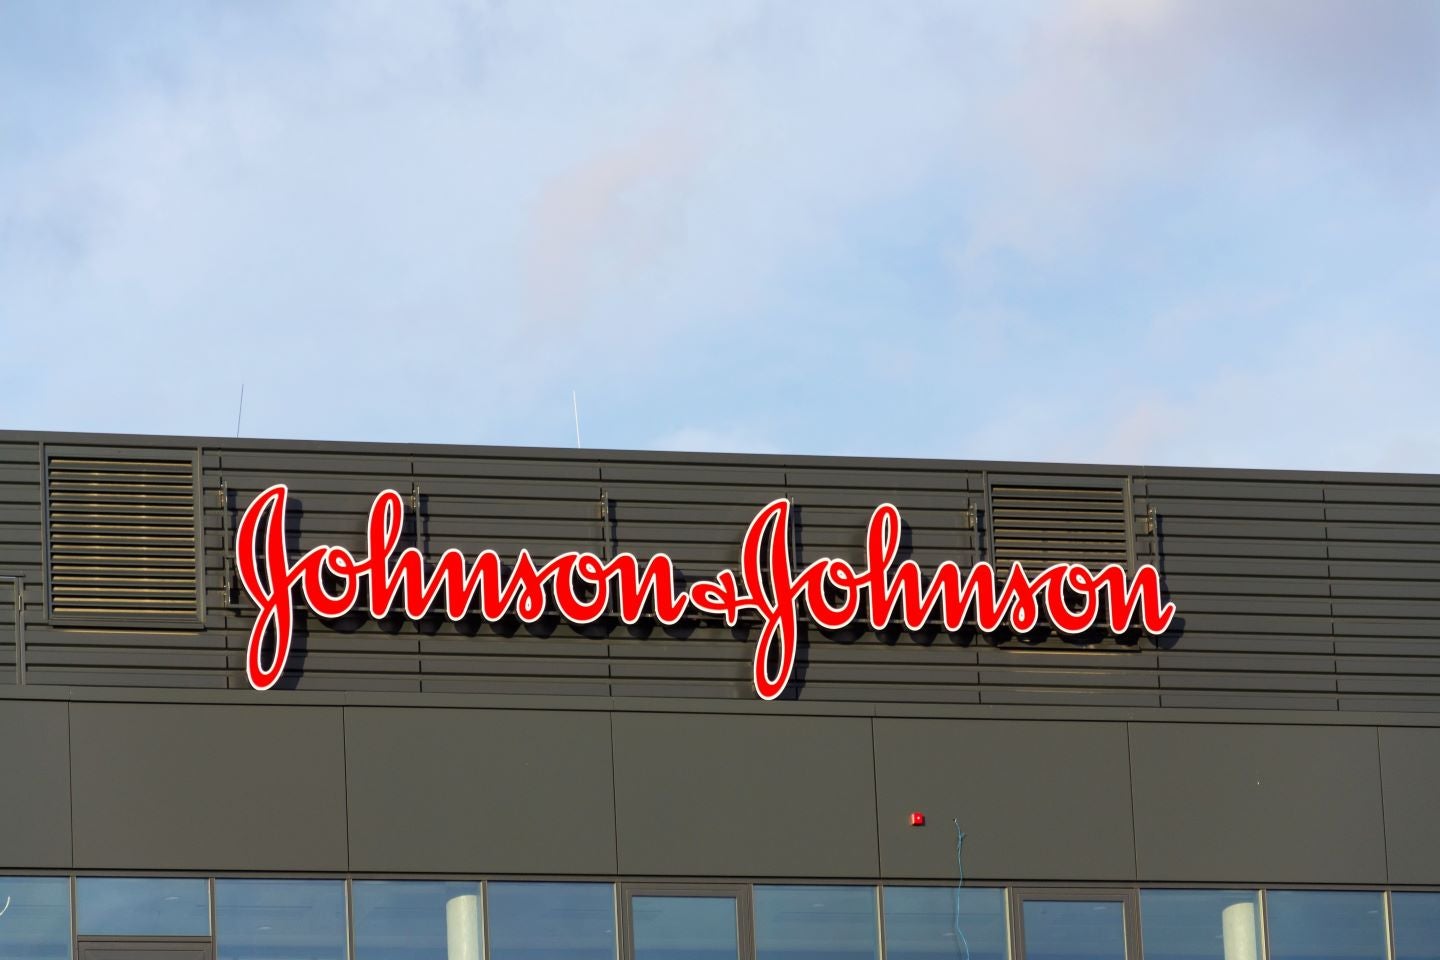 Johnson & Johnson agrees to acquire Ambrx Biopharma for $2bn